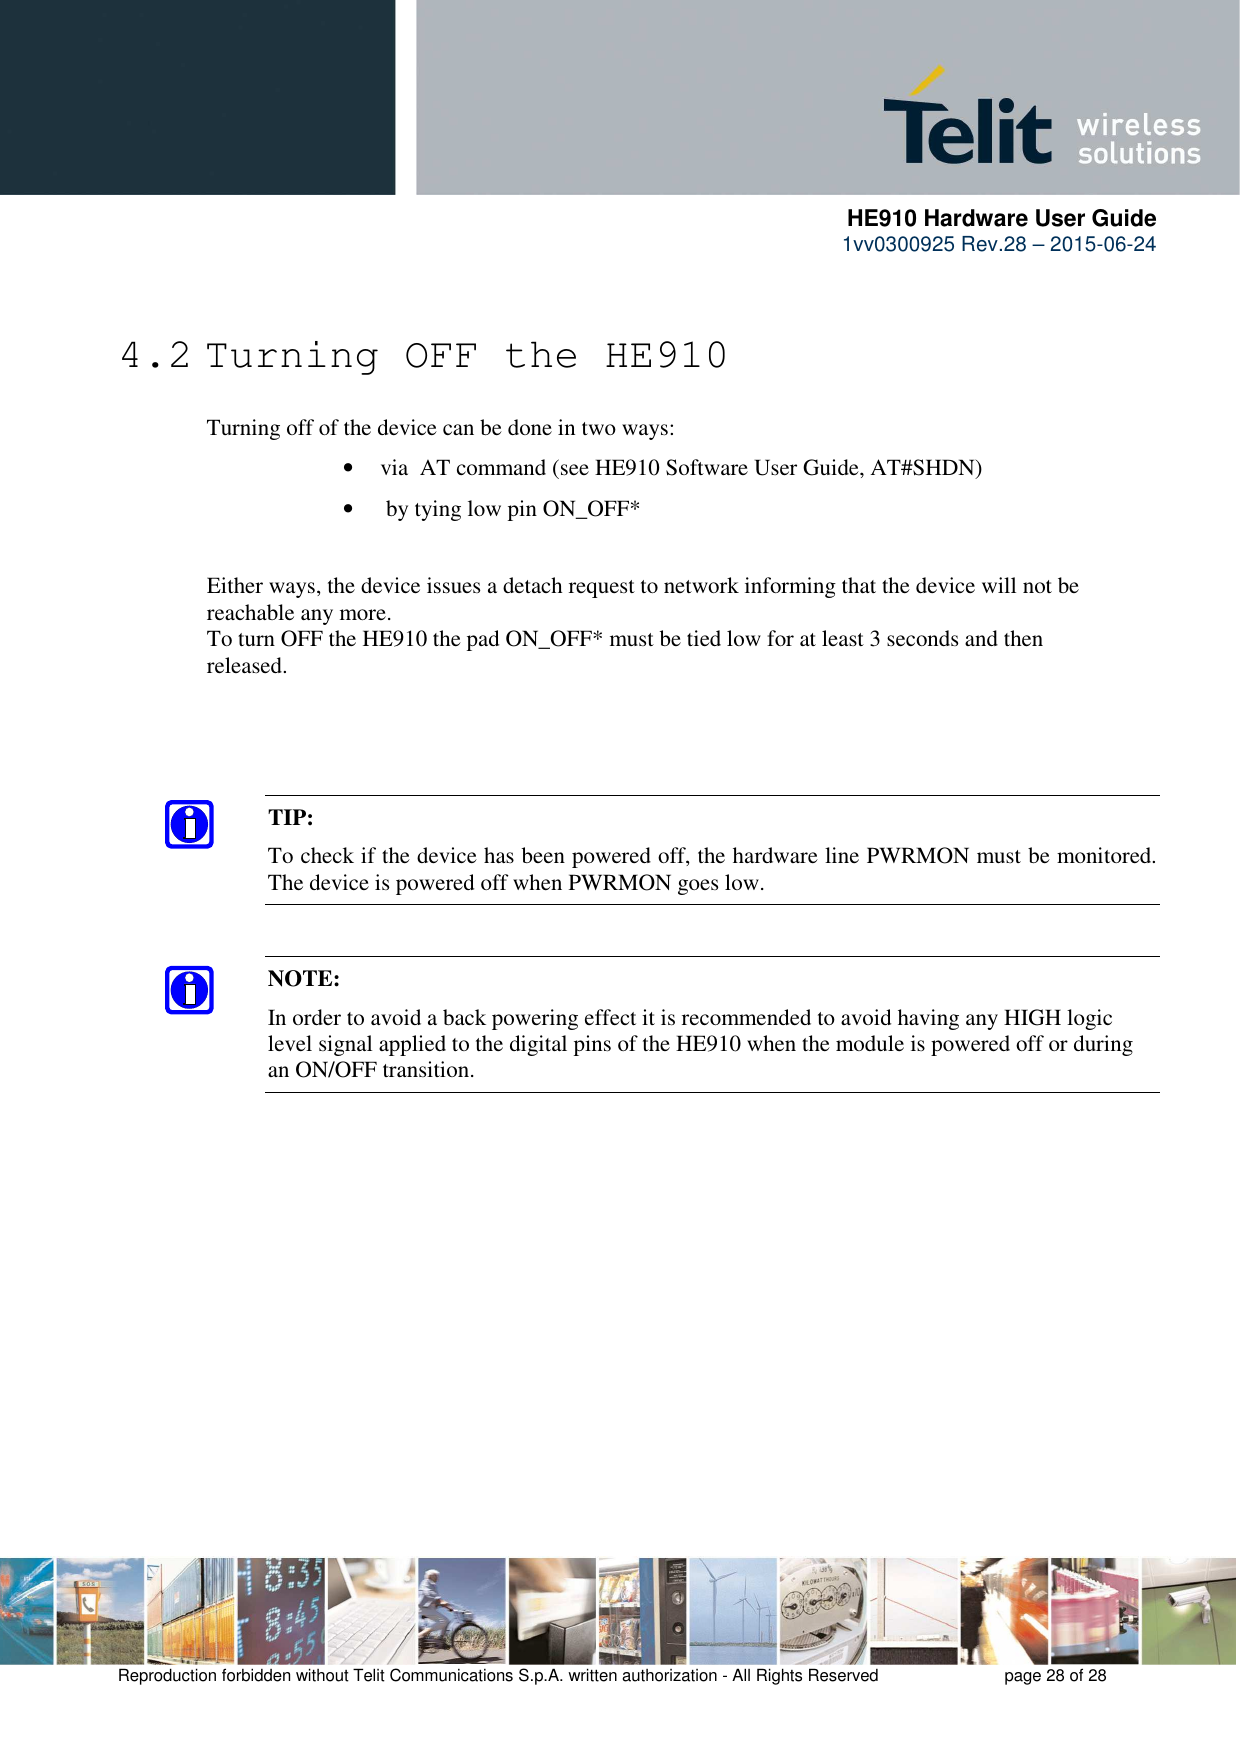      HE910 Hardware User Guide 1vv0300925 Rev.28 – 2015-06-24    Reproduction forbidden without Telit Communications S.p.A. written authorization - All Rights Reserved    page 28 of 28   4.2 Turning OFF the HE910  Turning off of the device can be done in two ways: • via  AT command (see HE910 Software User Guide, AT#SHDN) •  by tying low pin ON_OFF*    Either ways, the device issues a detach request to network informing that the device will not be   reachable any more.    To turn OFF the HE910 the pad ON_OFF* must be tied low for at least 3 seconds and then   released.        TIP:  To check if the device has been powered off, the hardware line PWRMON must be monitored. The device is powered off when PWRMON goes low.  NOTE: In order to avoid a back powering effect it is recommended to avoid having any HIGH logic level signal applied to the digital pins of the HE910 when the module is powered off or during an ON/OFF transition.    